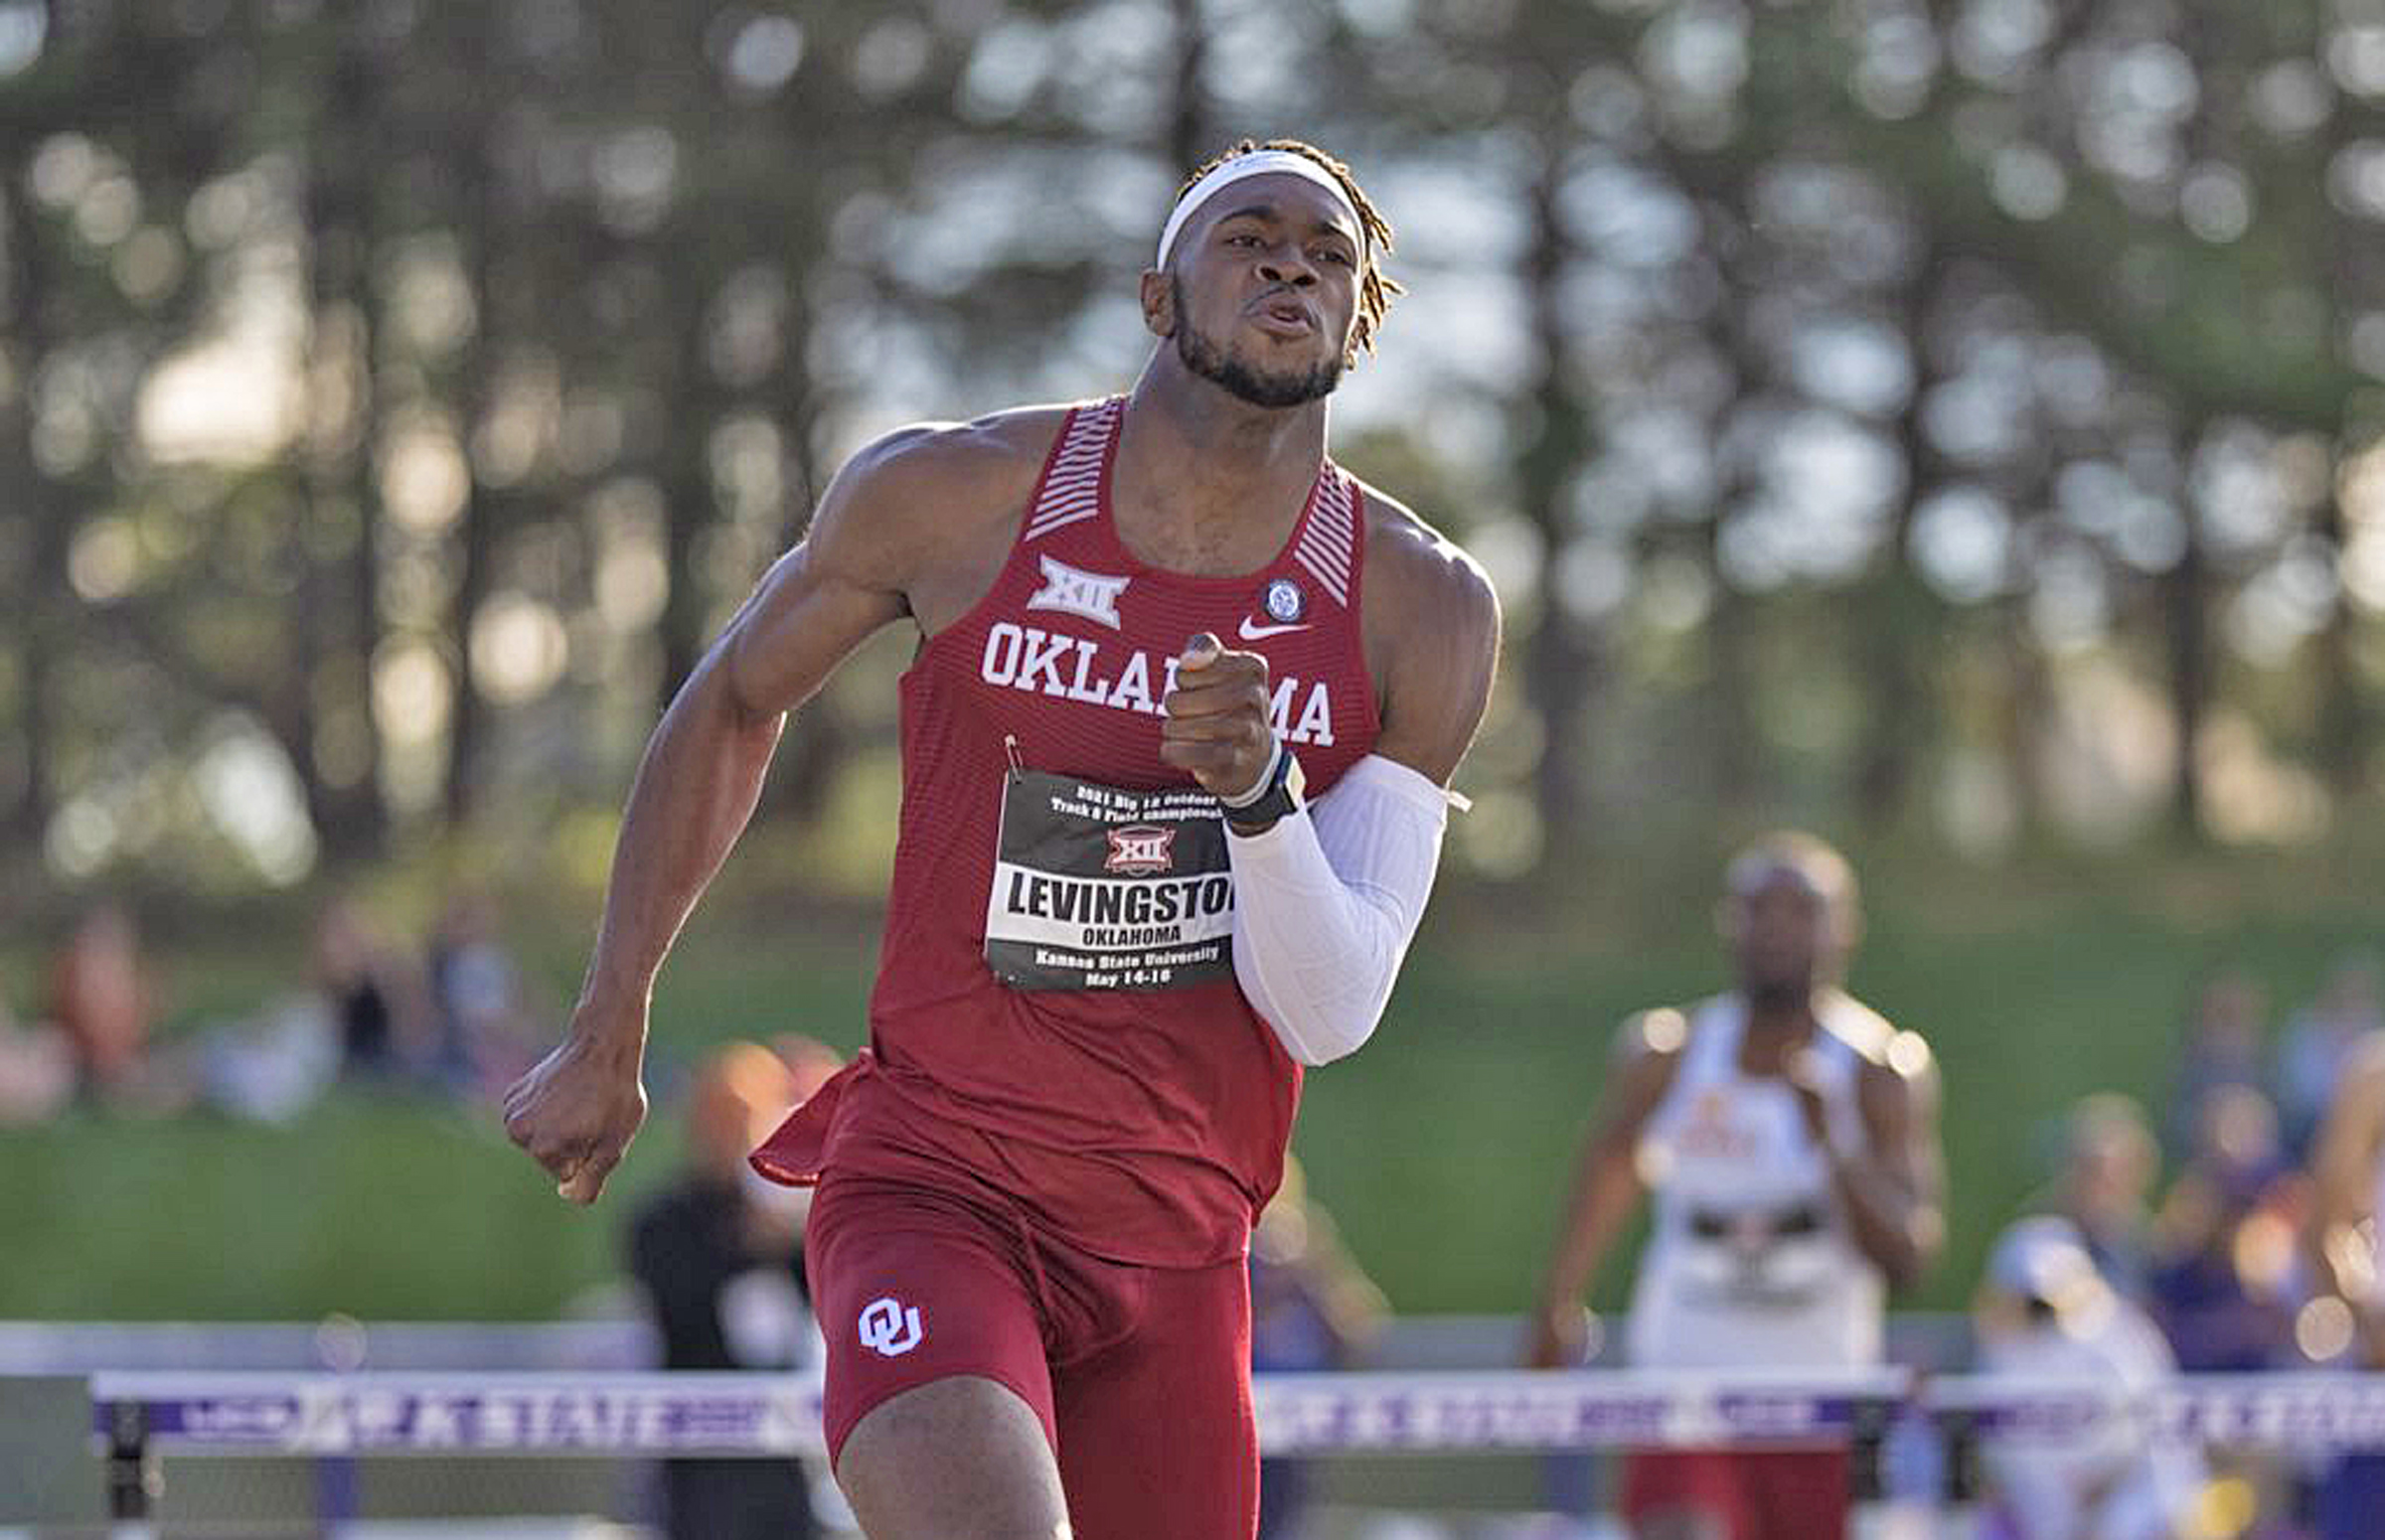 Oklahoma Finishes Strong at Big 12 Track and Field Championships